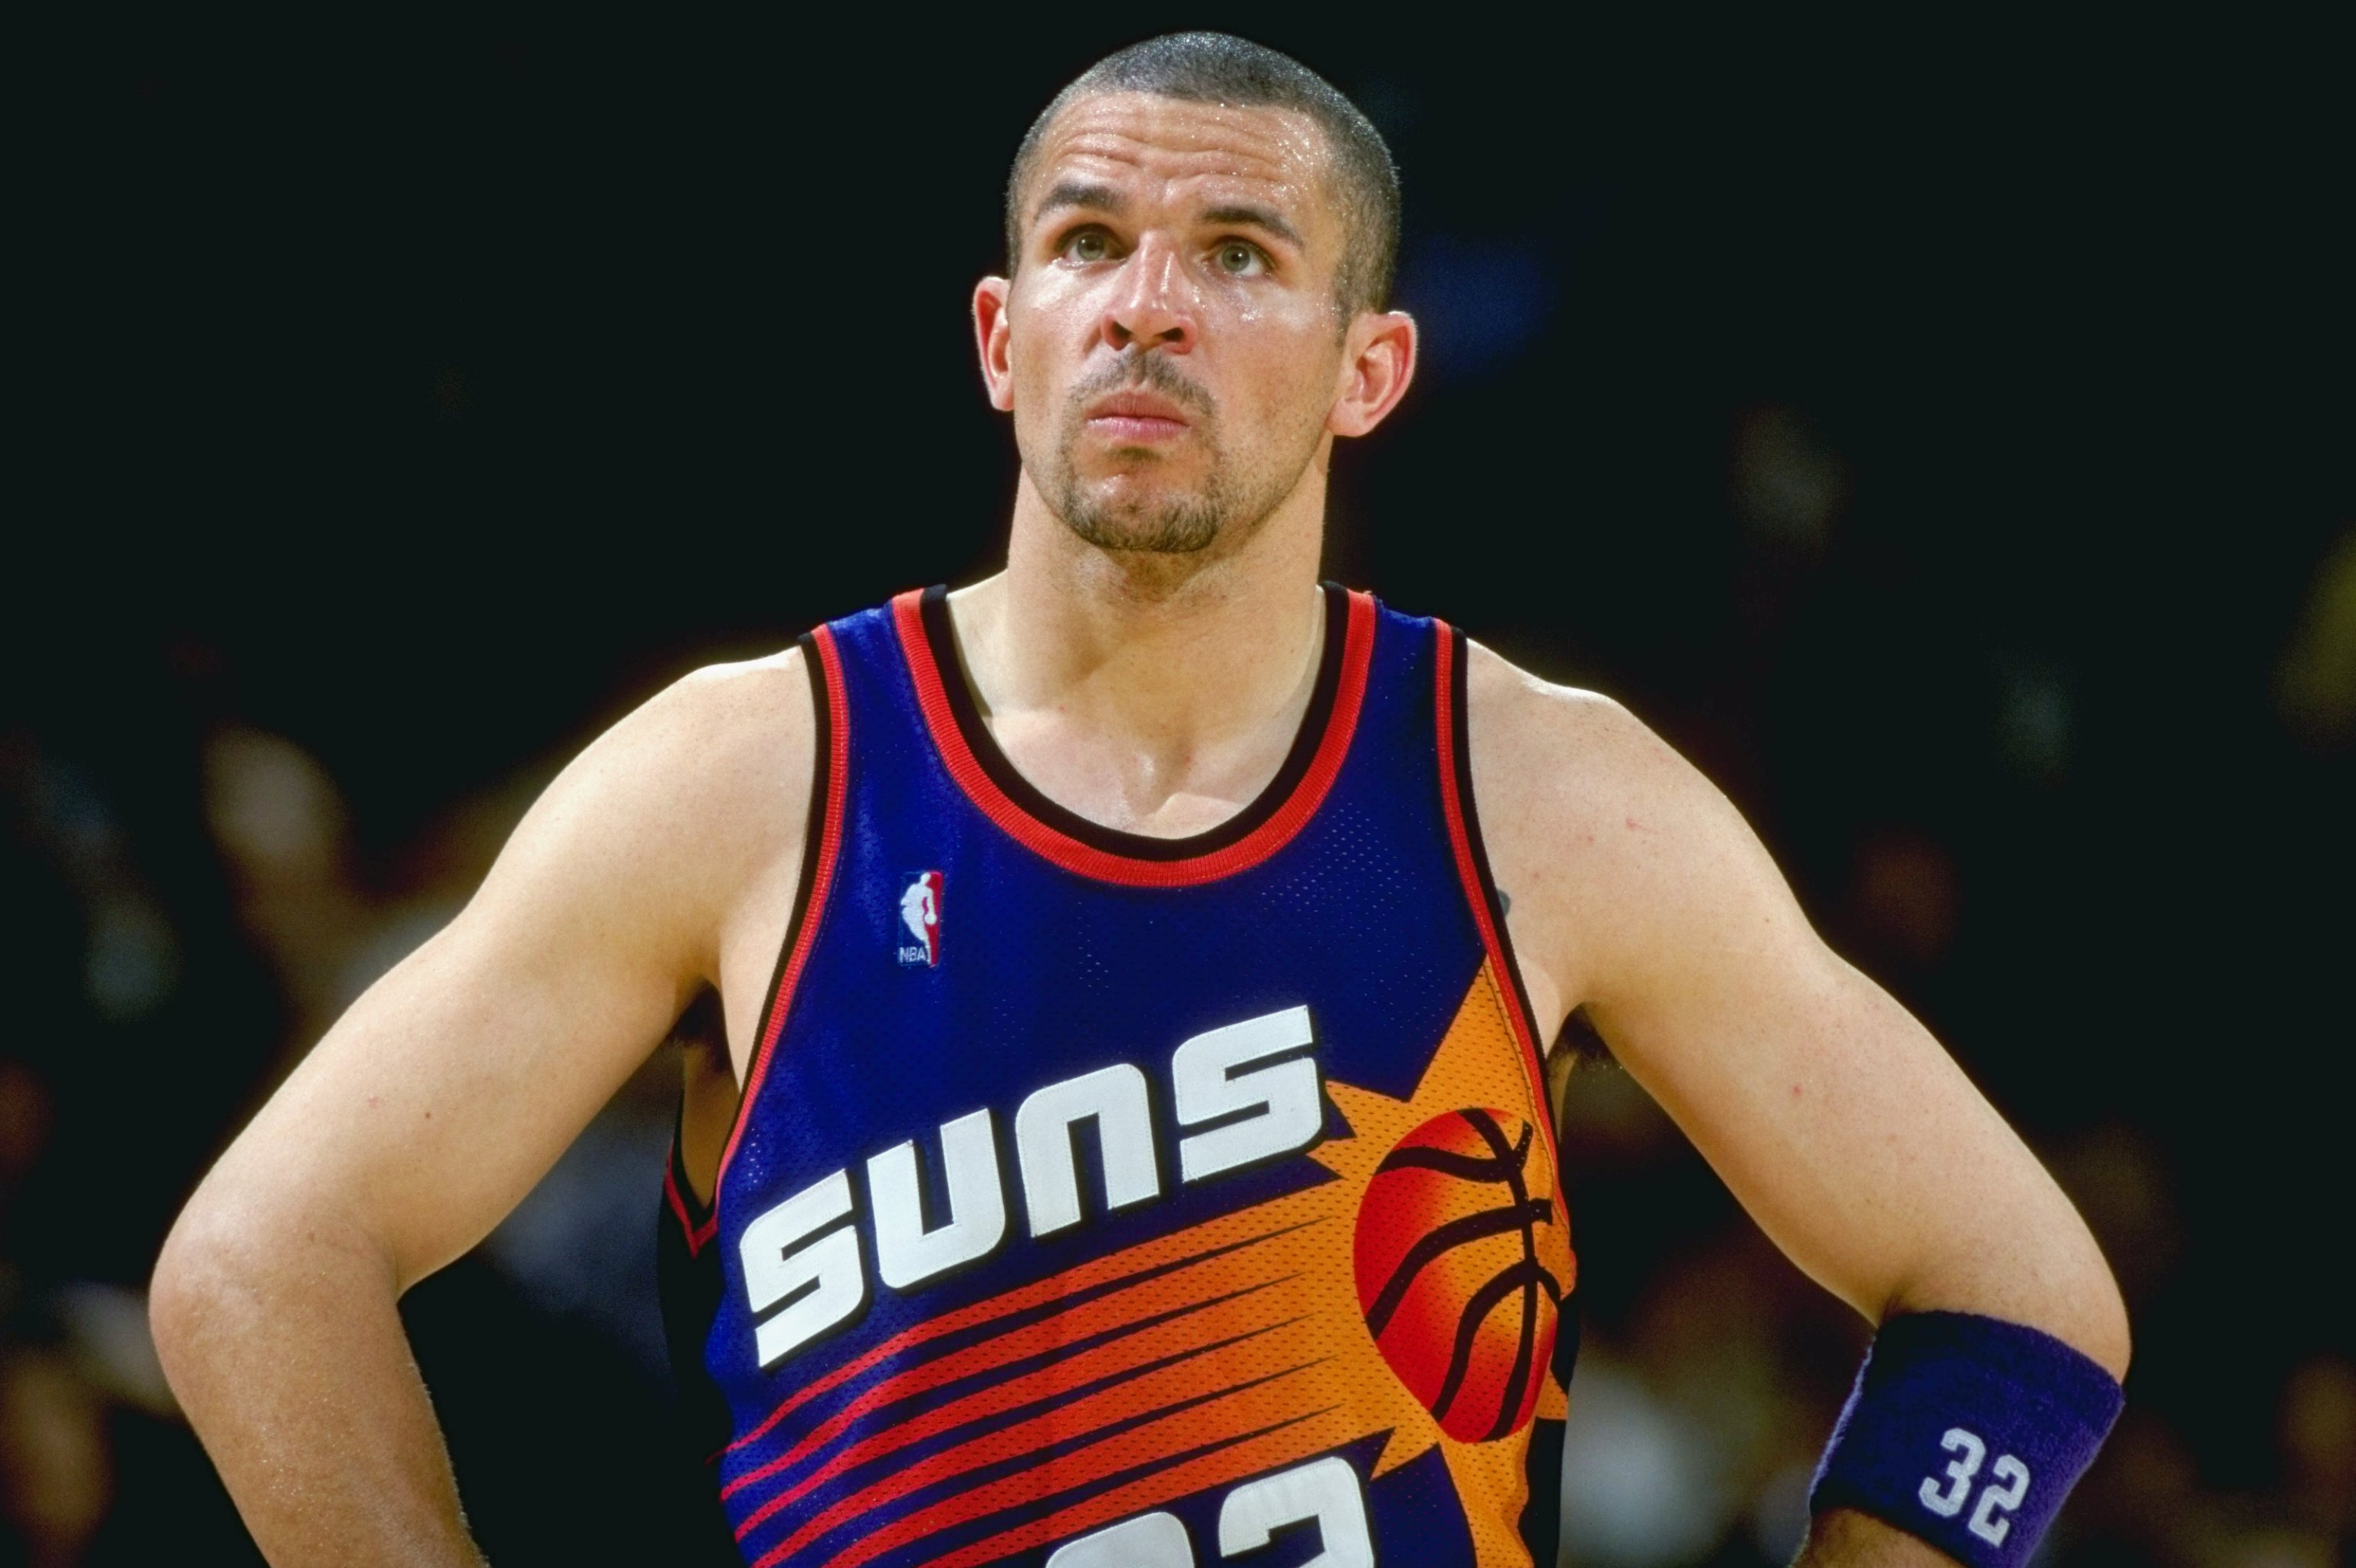 Jason Kidd’s Violent Domestic Abuse Arrest Led to His Trade to New Jersey